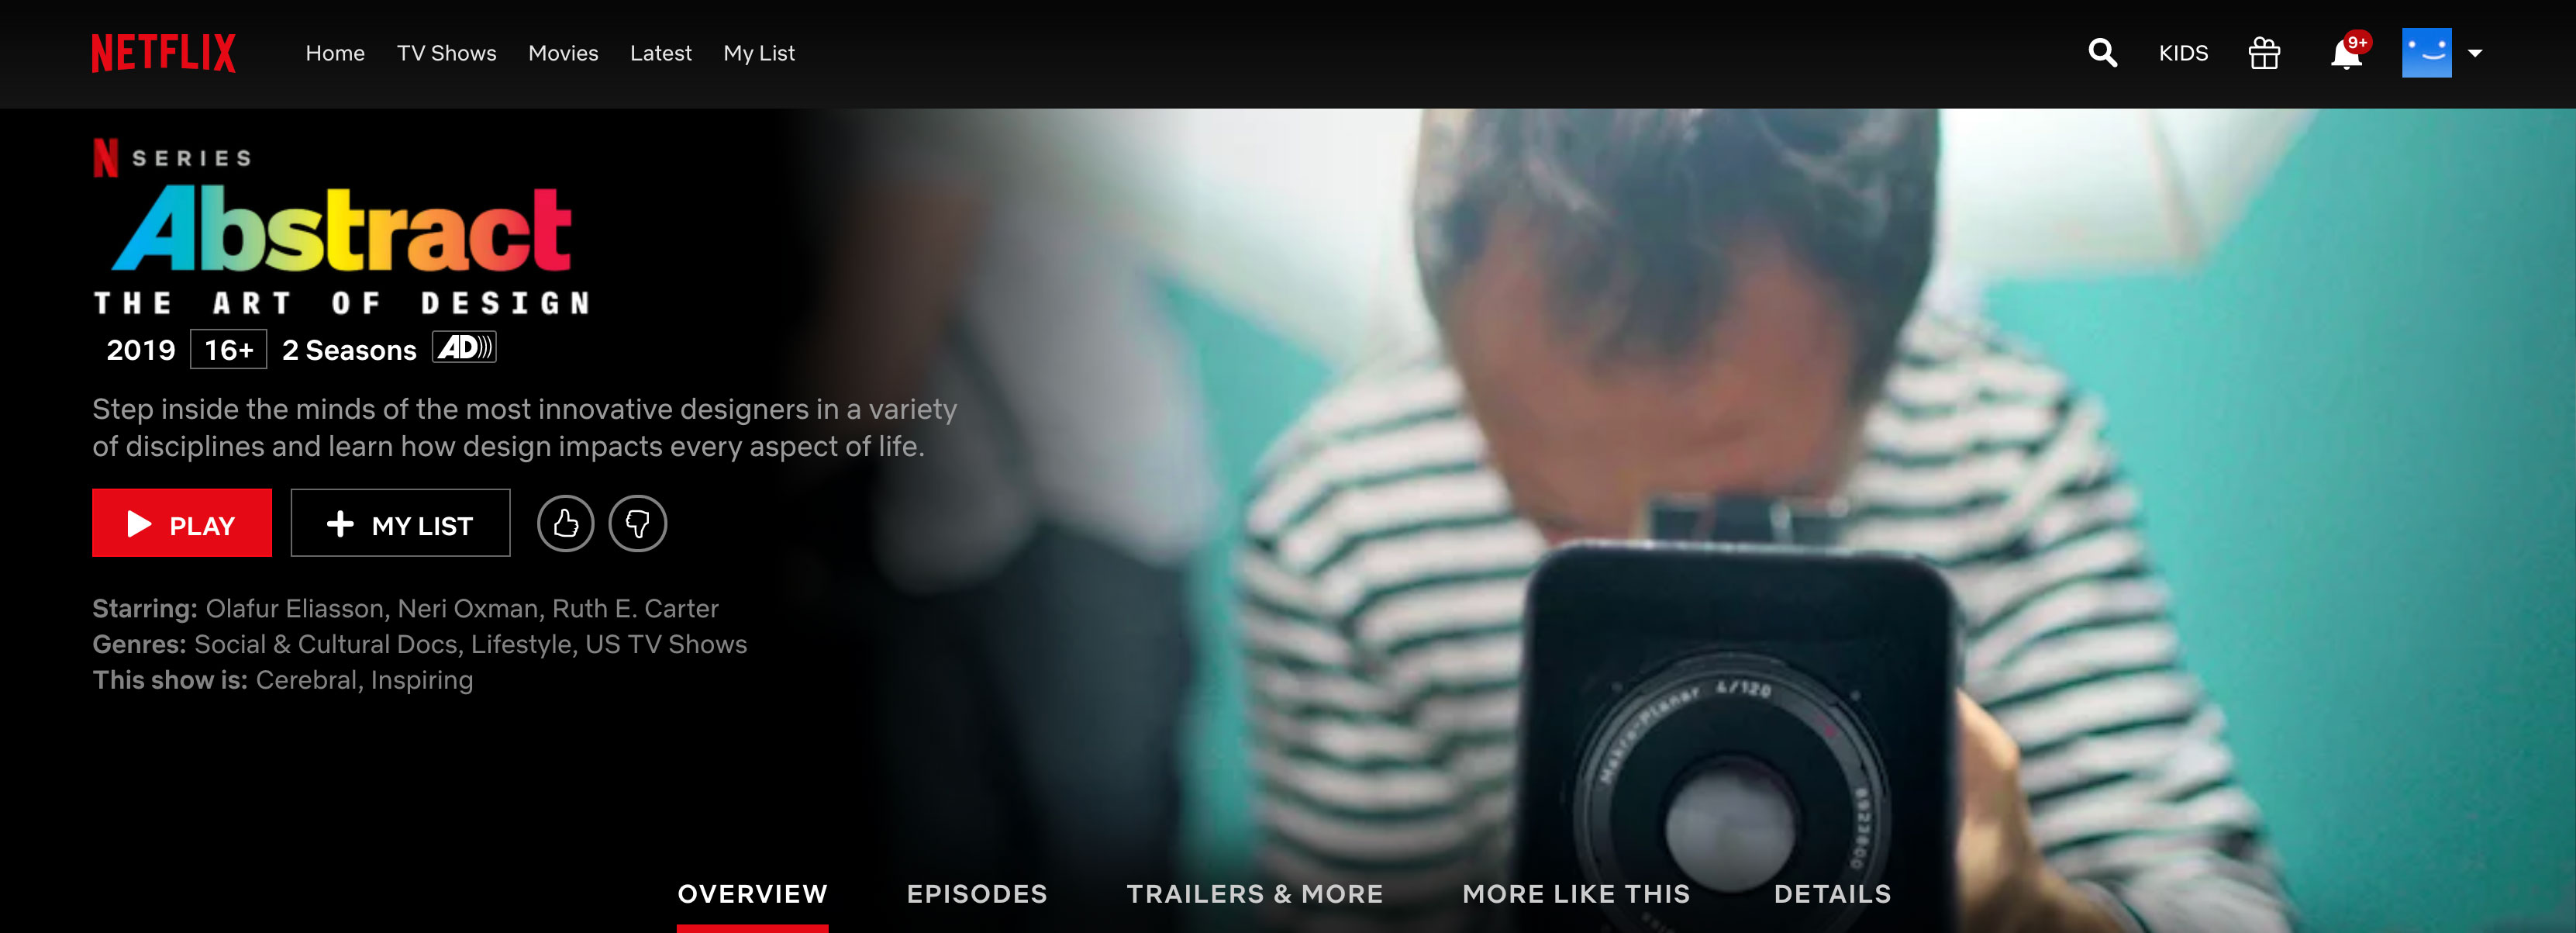 f/6.3 fotografia Philippines by Jayson and Joanne Arquiza Top 5 must watch photography title on Netflix during lockdown